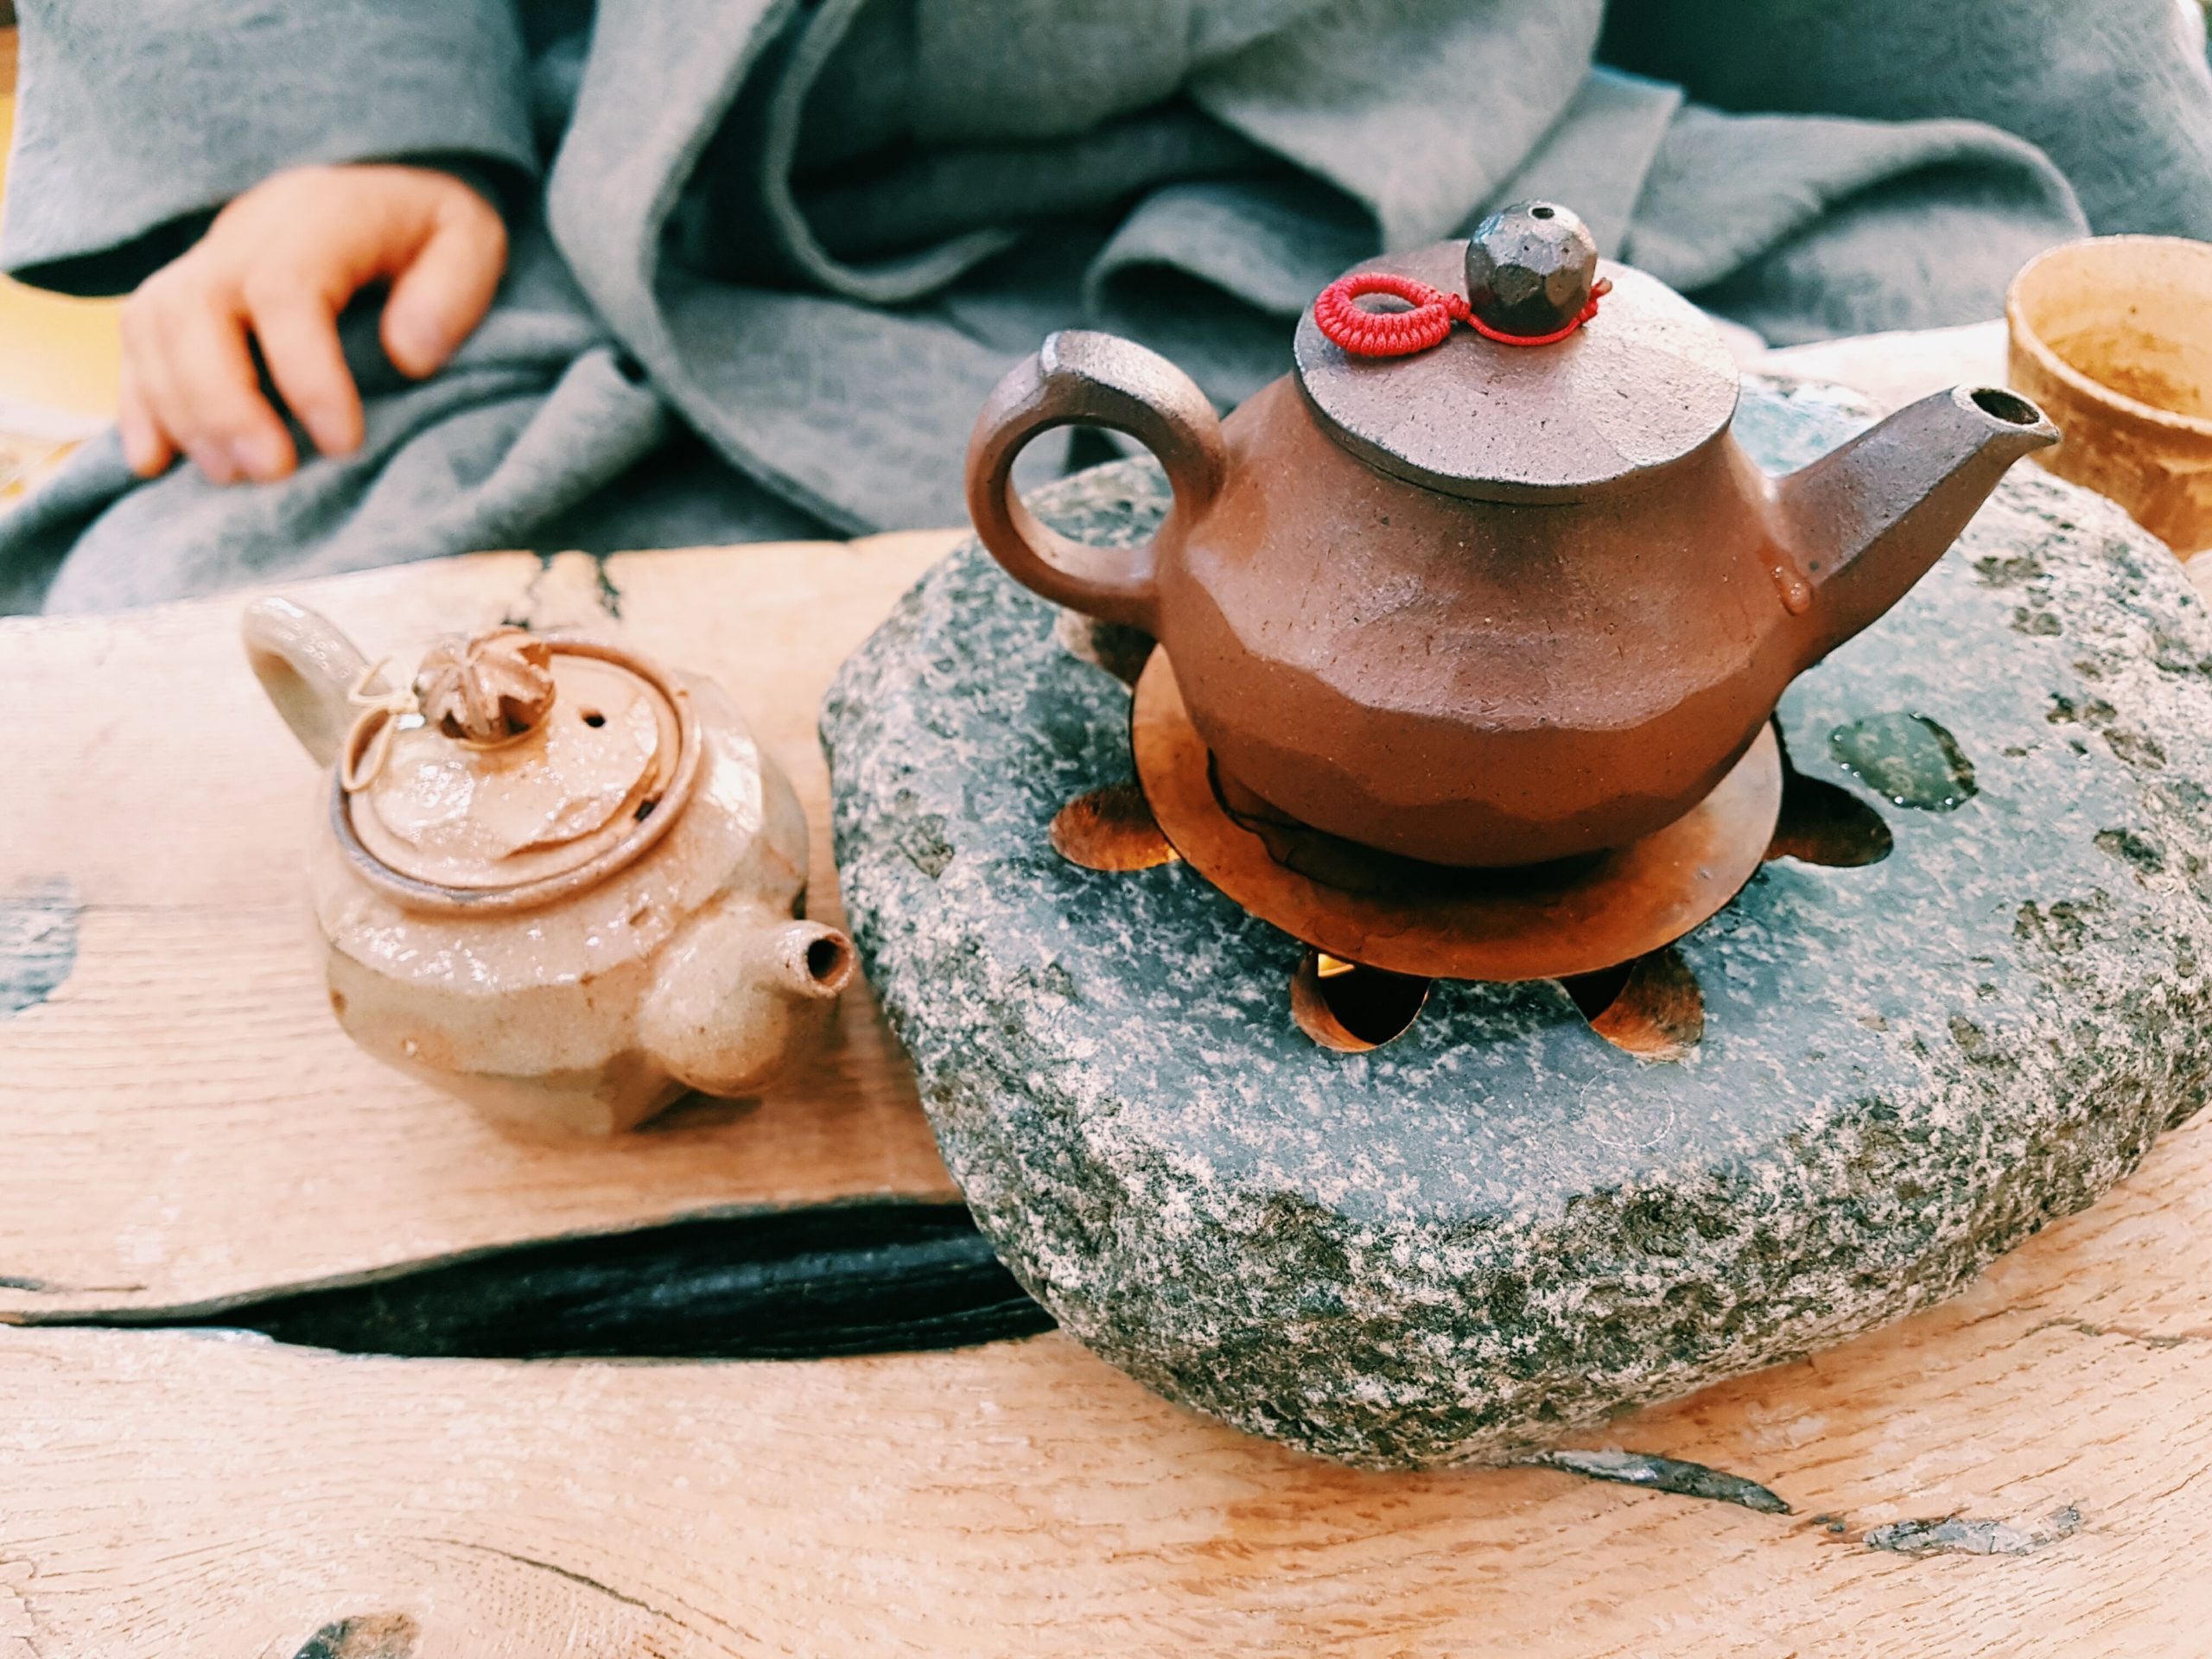 Two pots of tea on a table